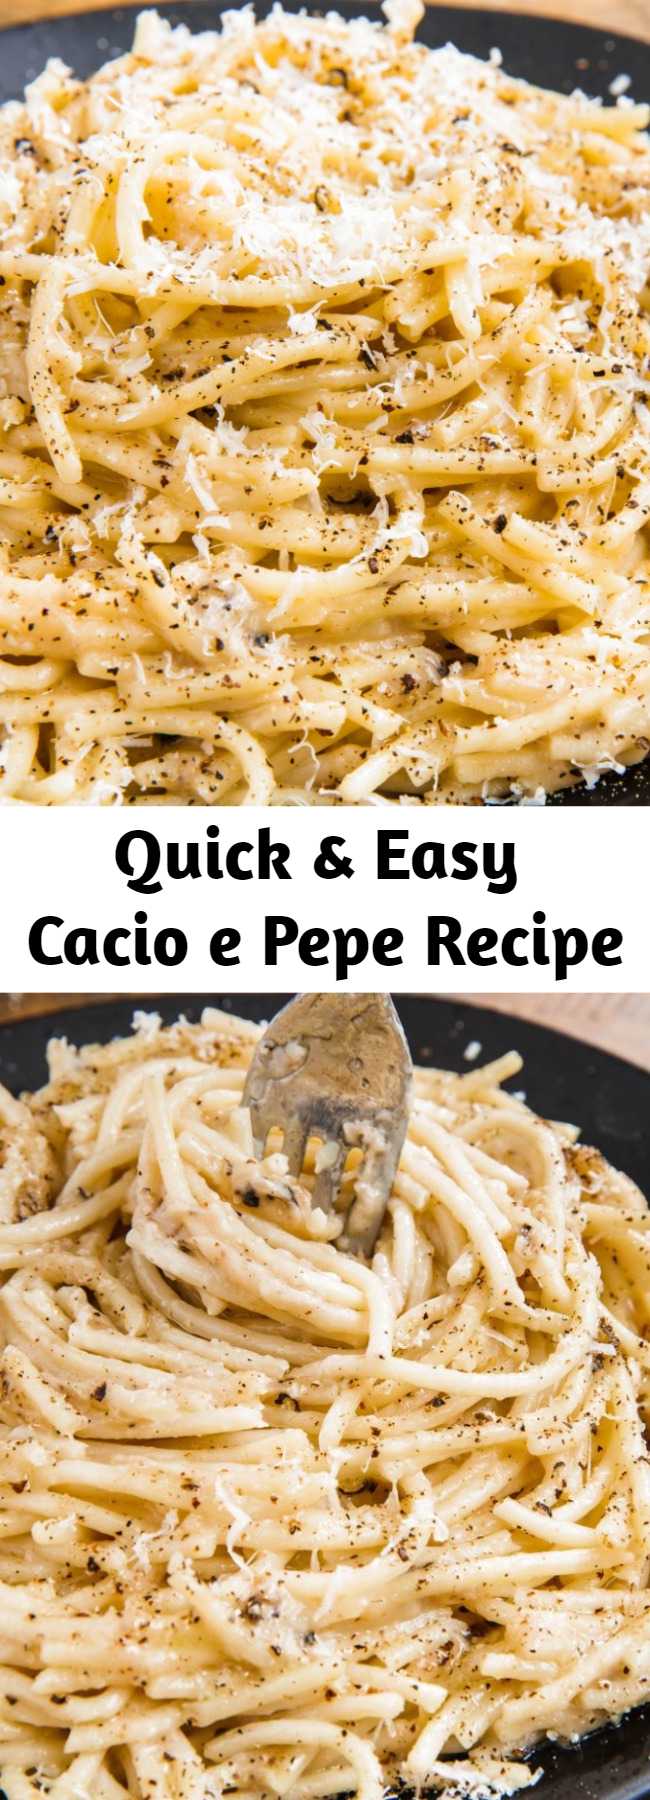 Quick & Easy Cacio e Pepe Recipe - Cacio e pepe literally translates to “cheese and pepper,” and while those are the prominent flavors here, this dish is SO much more. It’s transformative. And what makes it so perfect? Its simplicity. #easy #recipe #pasta #cacio #pepe #cheese #pepper #dinner #meals #authentic